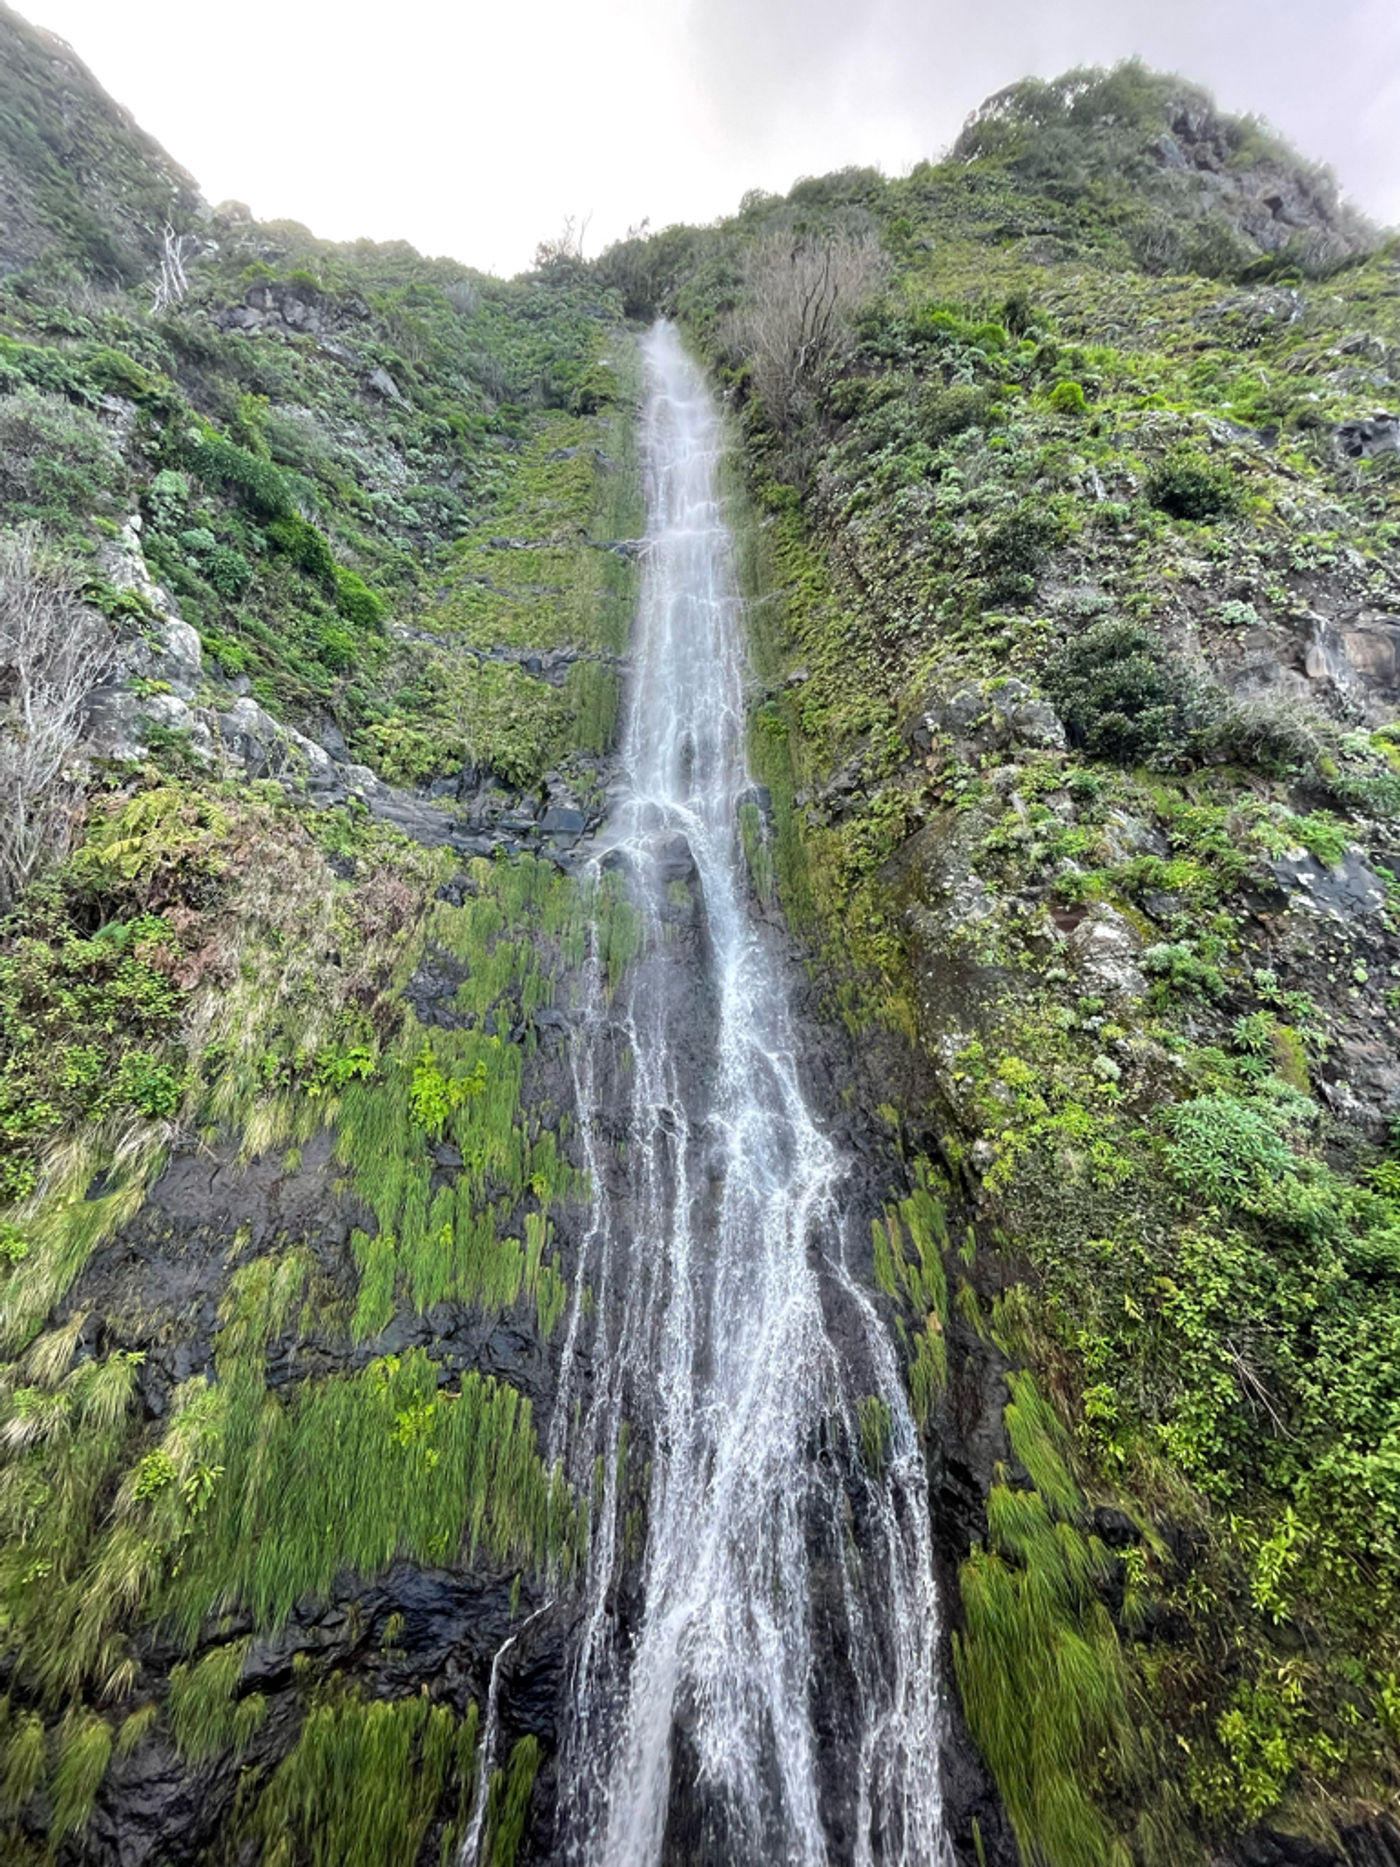 Waterfall on the way back home